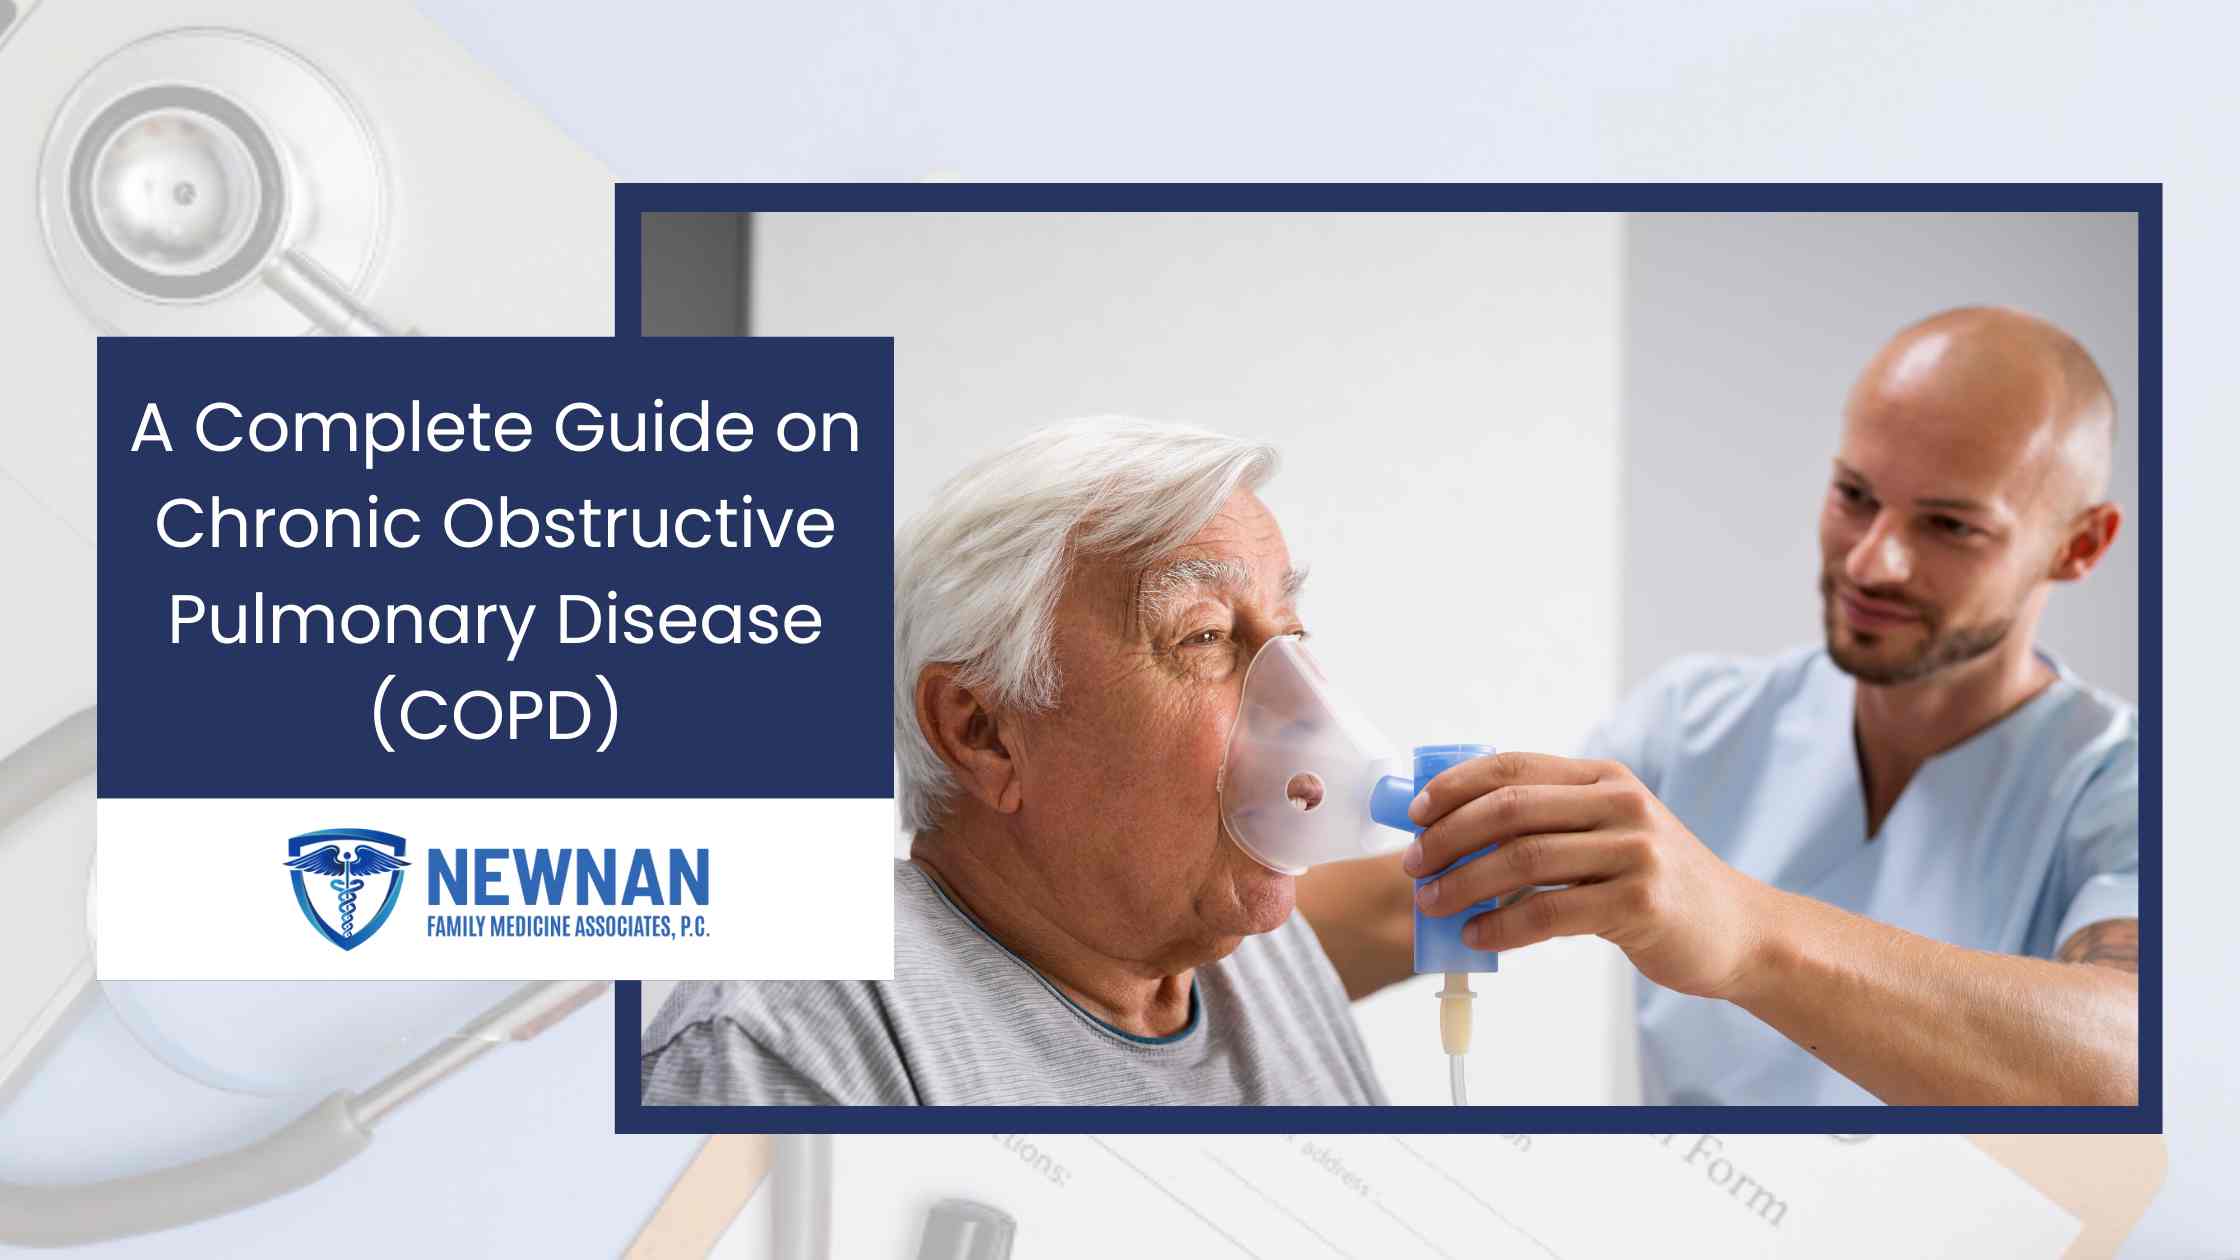 A Complete Guide on Chronic Obstructive Pulmonary Disease (COPD)